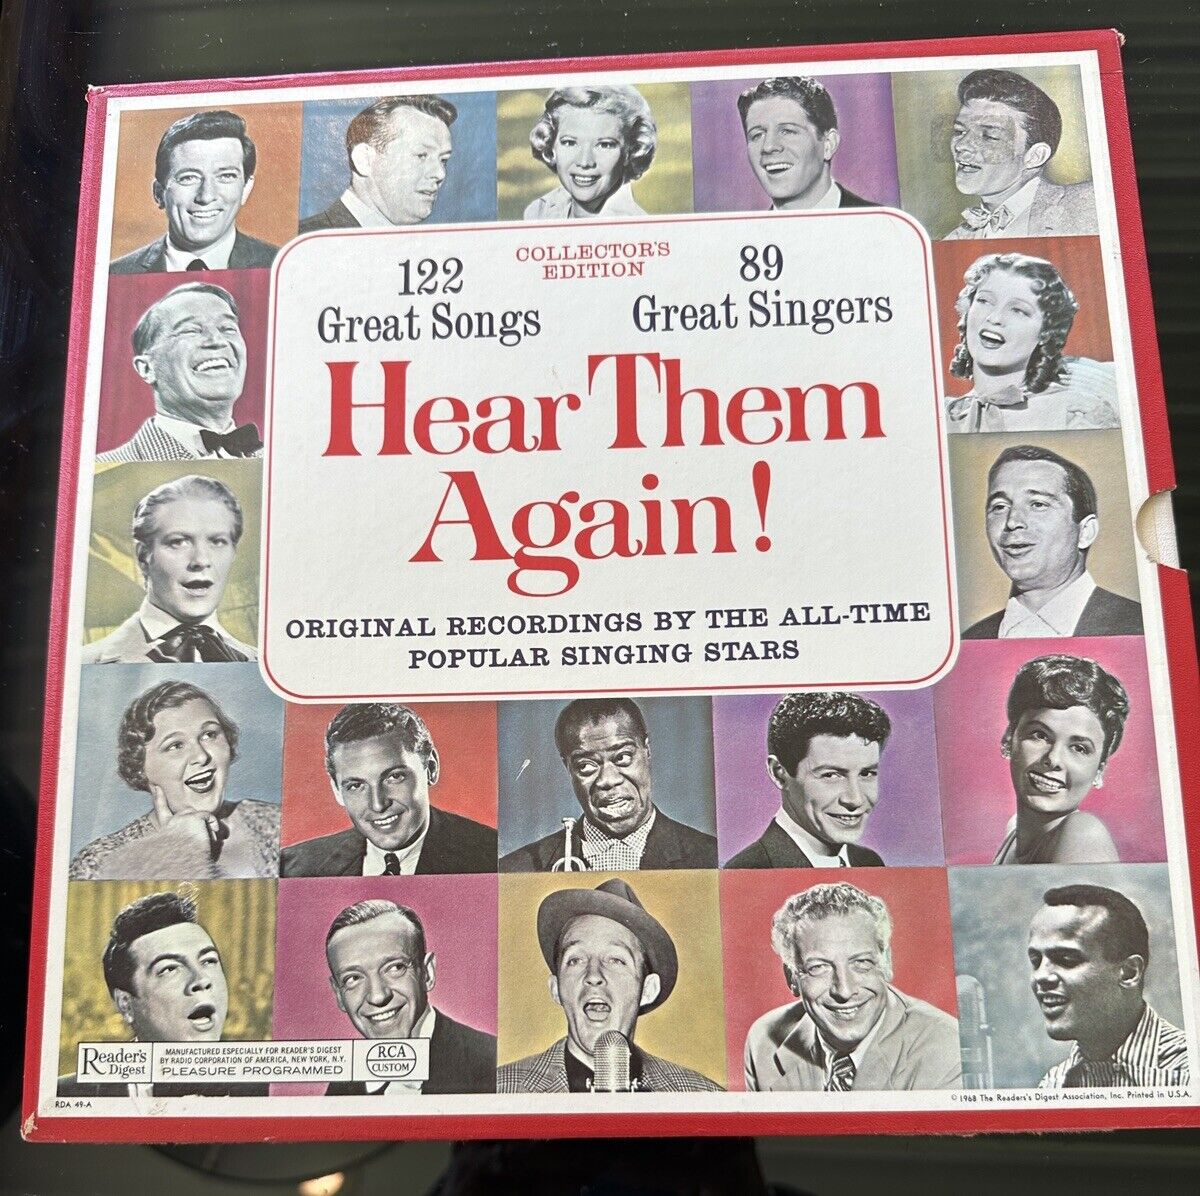 HEAR THEM AGAIN 10 LP Box 122 Great Songs 1968 50s 60s Jazz Vocal Music Albums